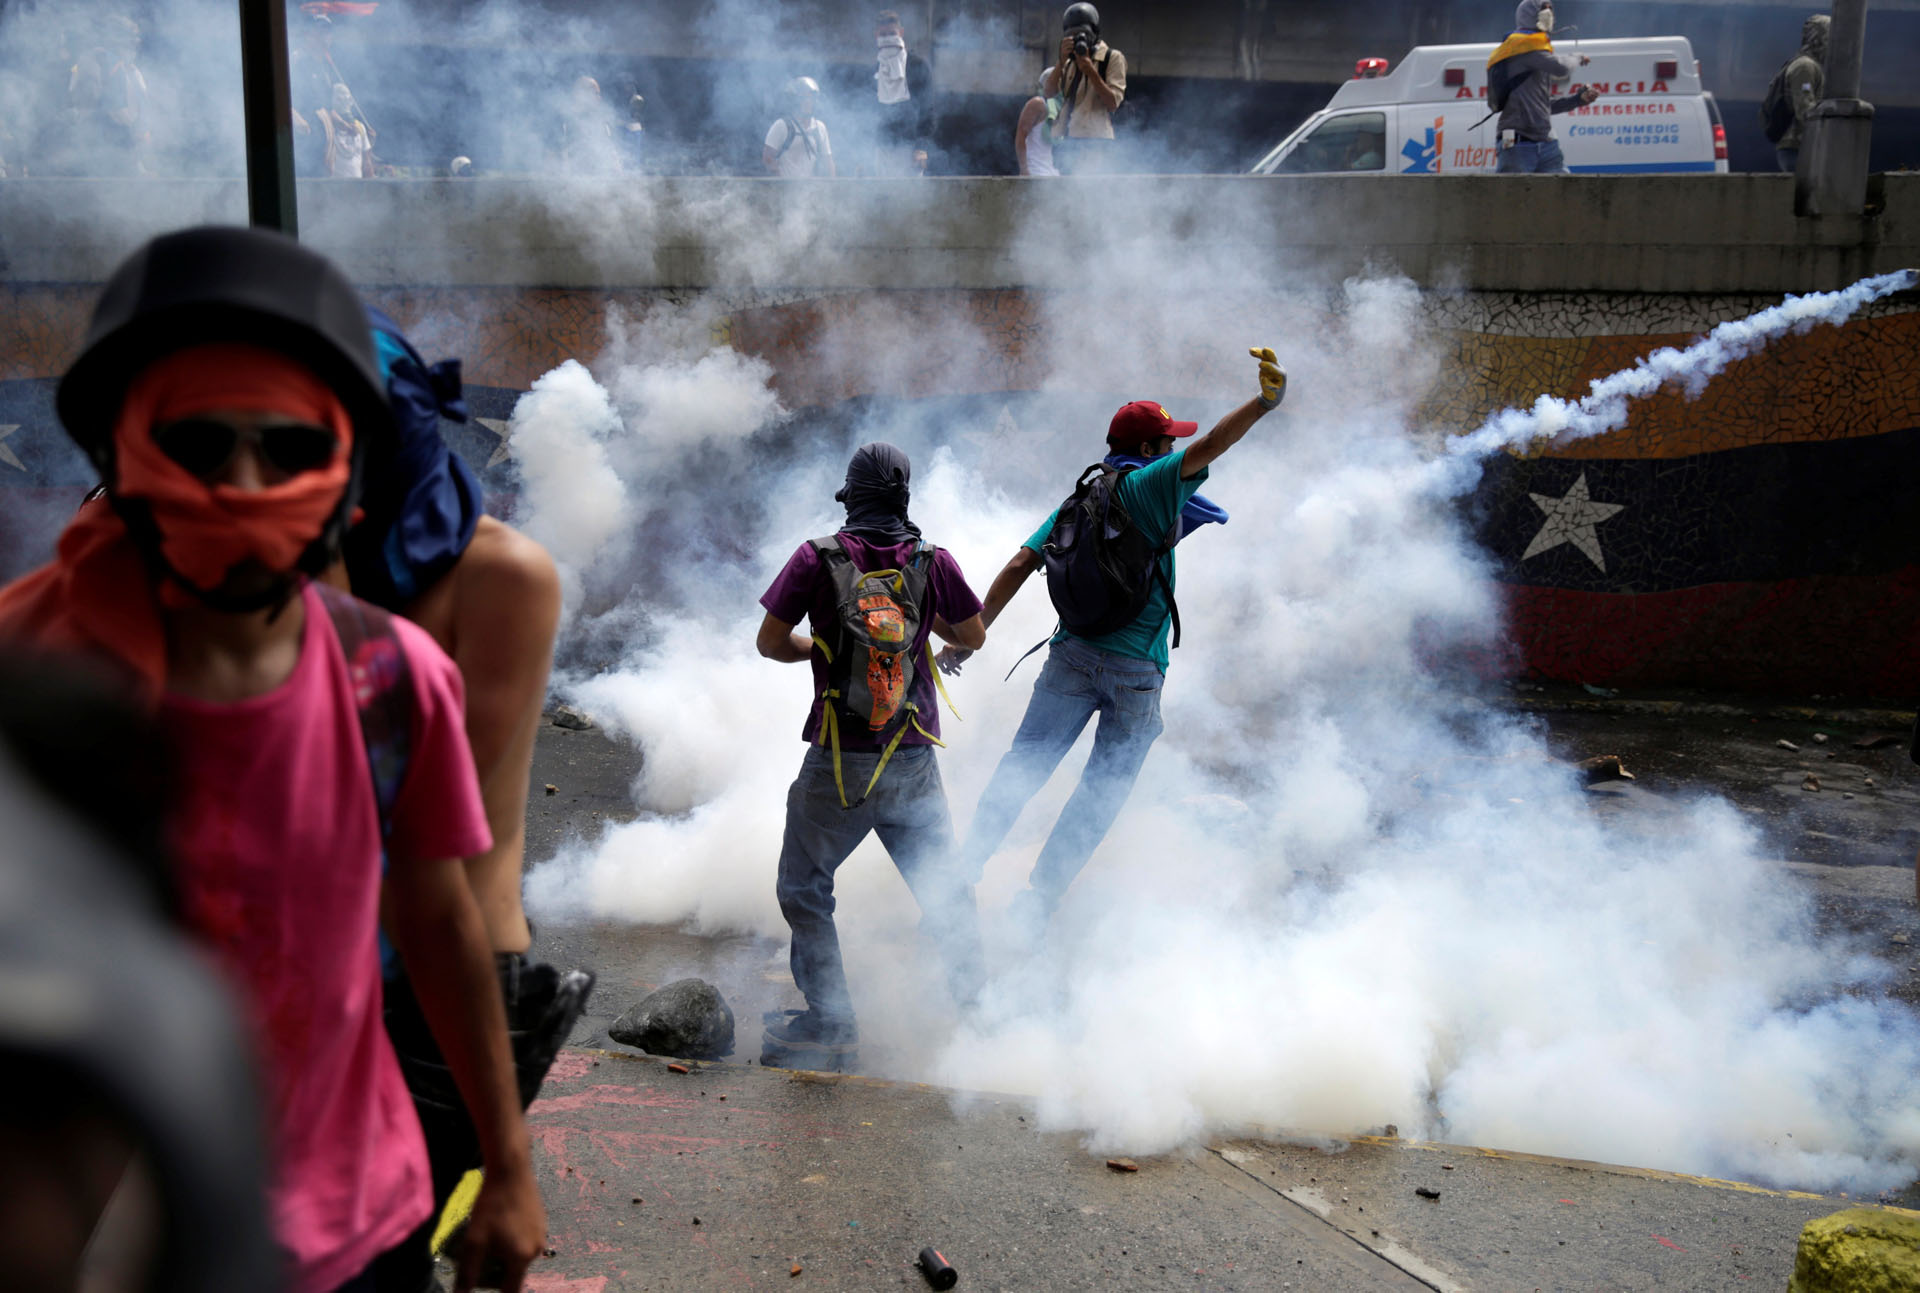 Demonstrators are seen amidst tear gas fired by police during an opposition rally in Caracas, Venezuela, April 6, 2017. REUTERS/Marco Bello